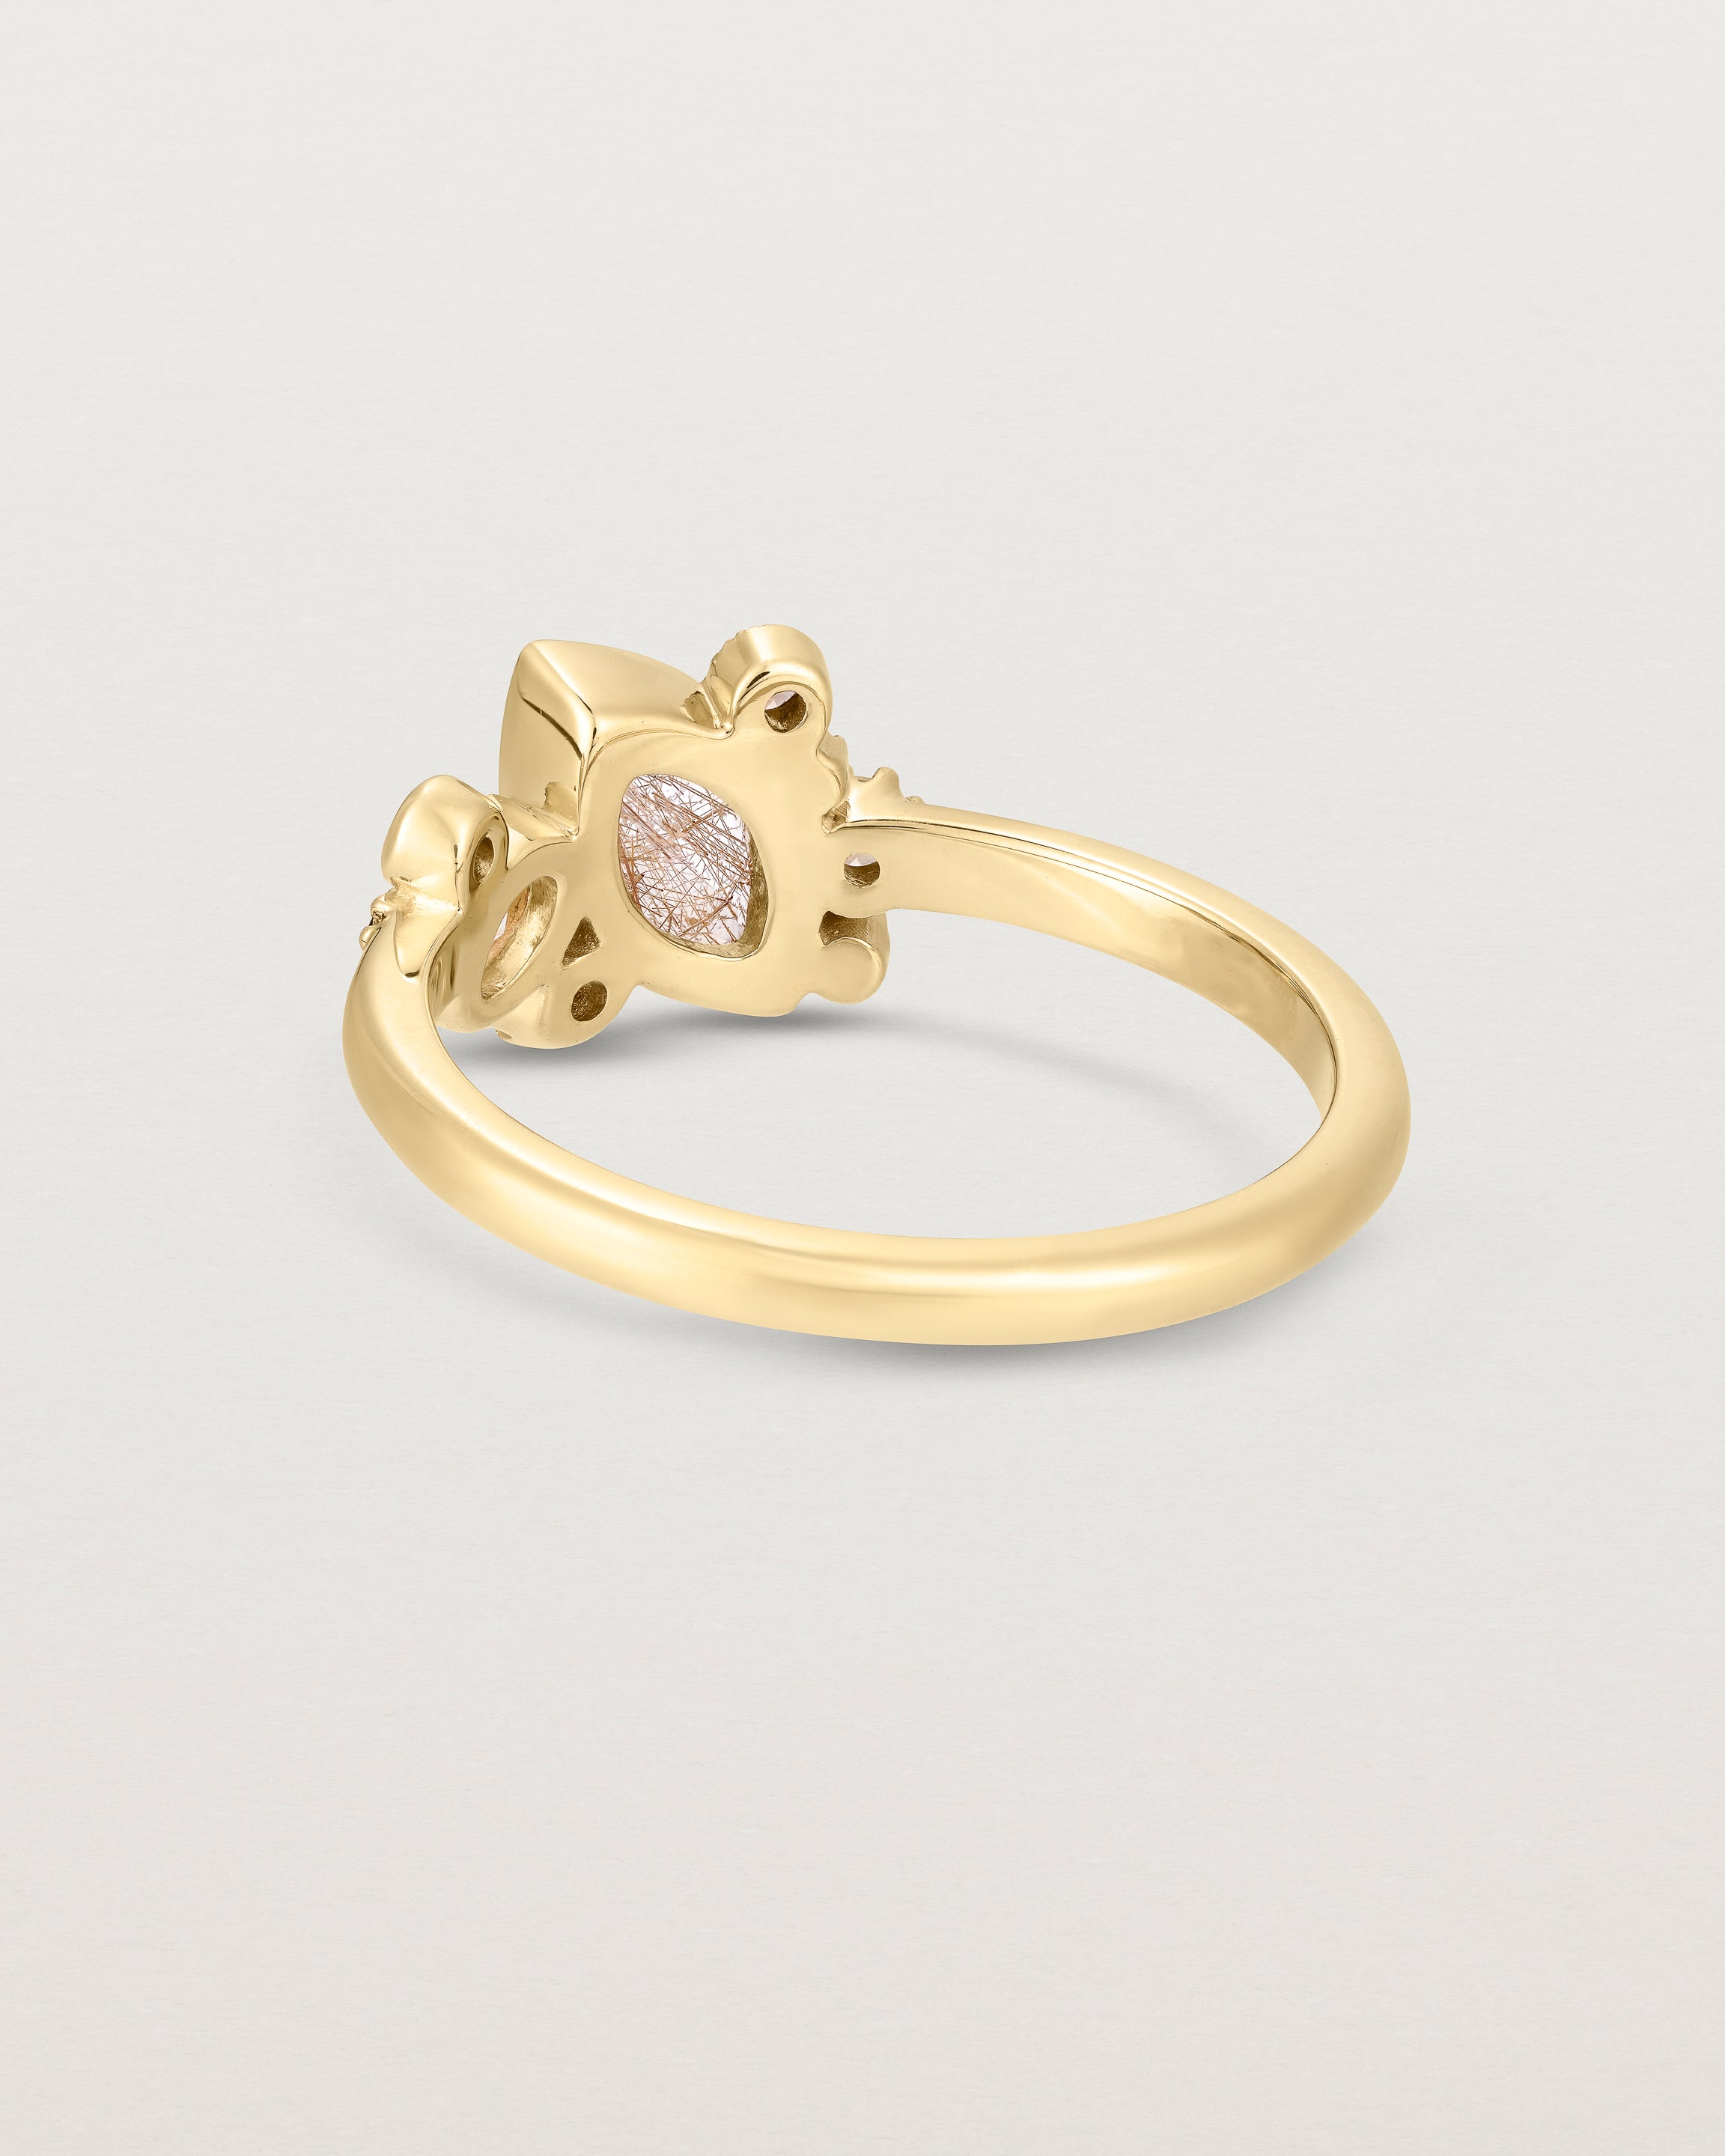 Product image of a yellow gold engagement ring with a rutilated quartz and diamonds, back view.